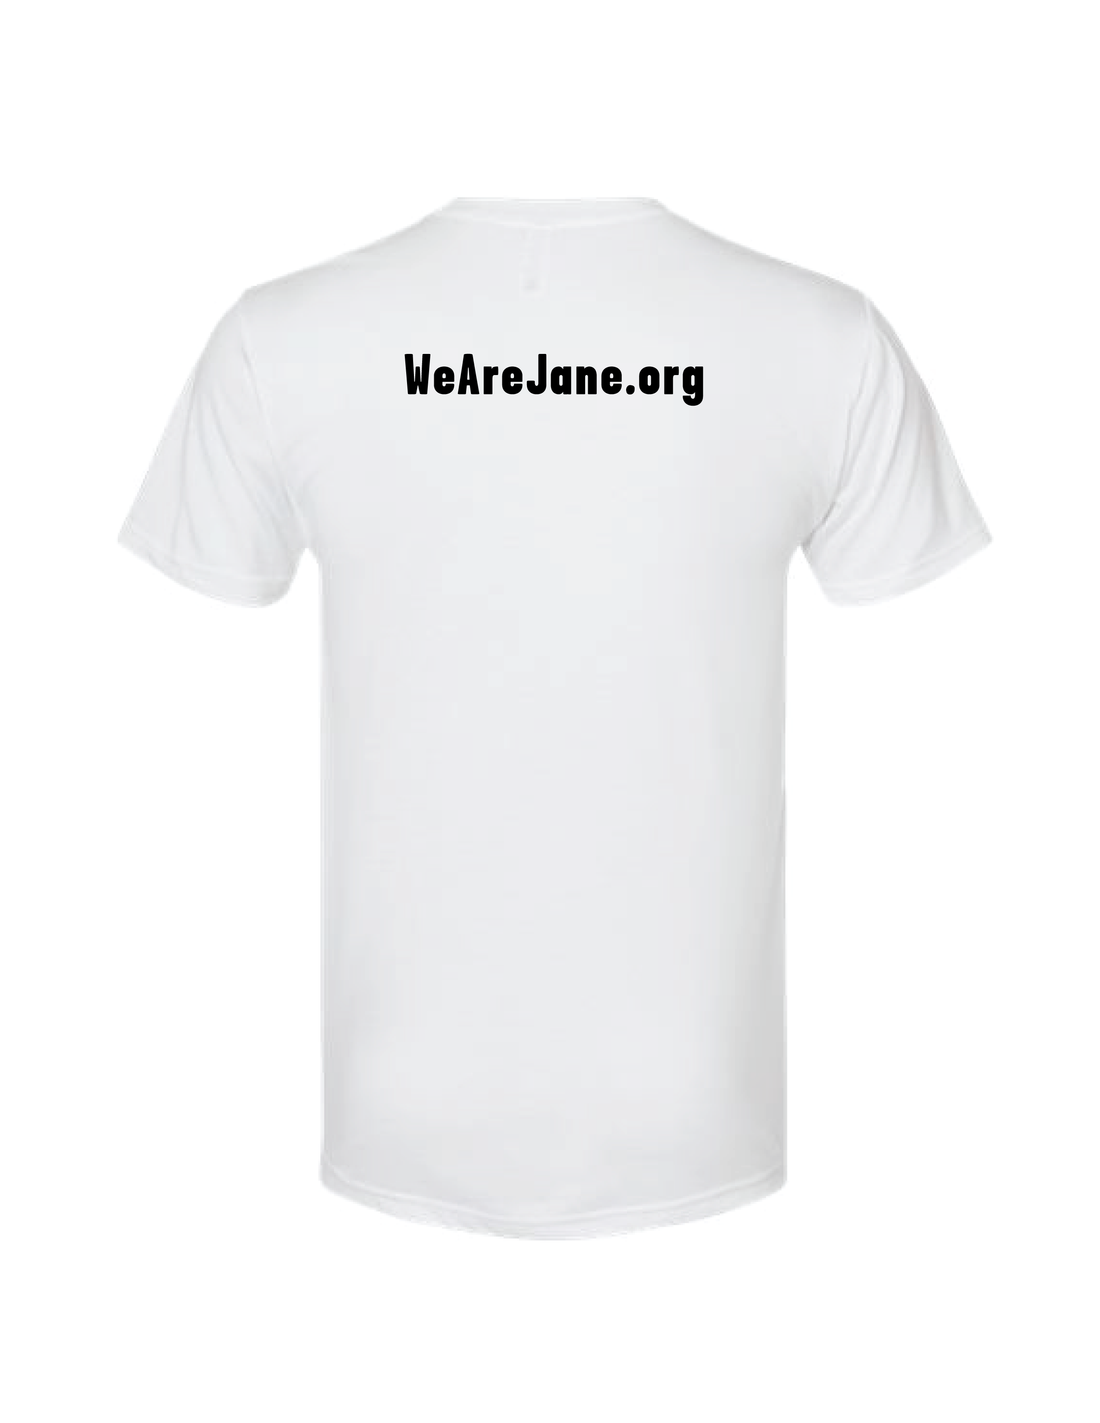 Unisex JANE Crew Neck T-Shirt in White with Black Letters